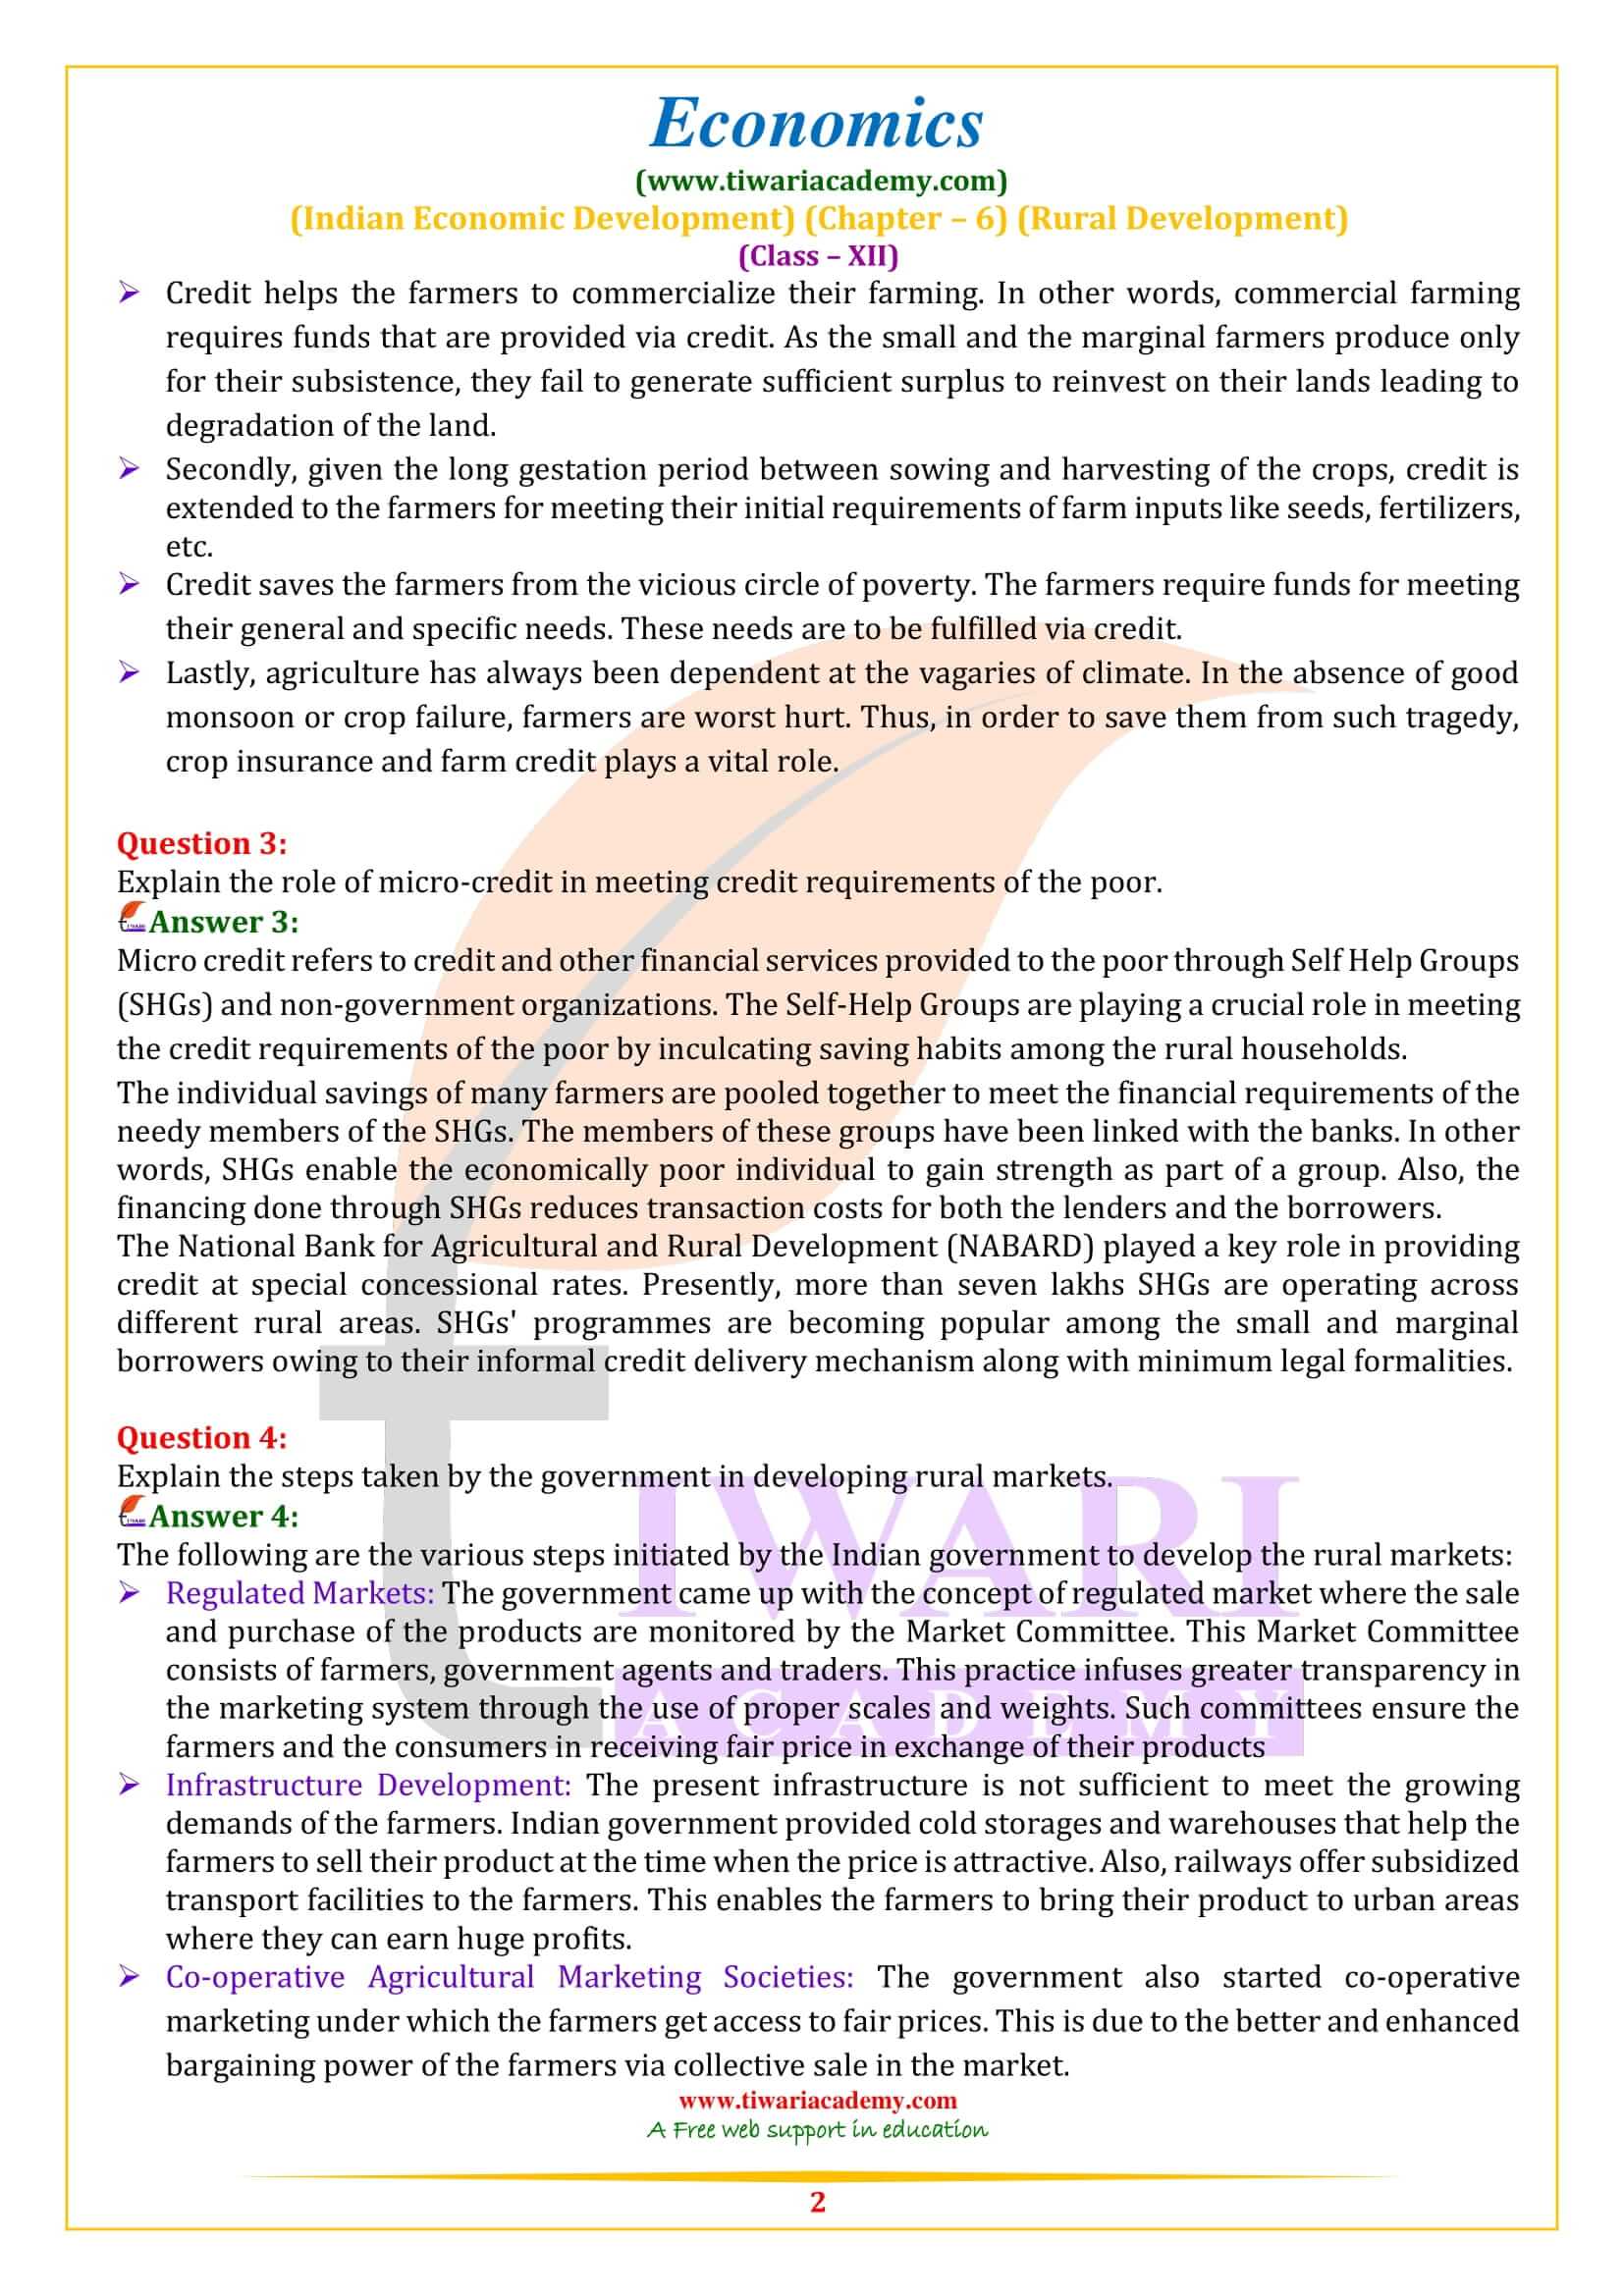 NCERT Solutions for Class 12 Indian Economic Development Chapter 6